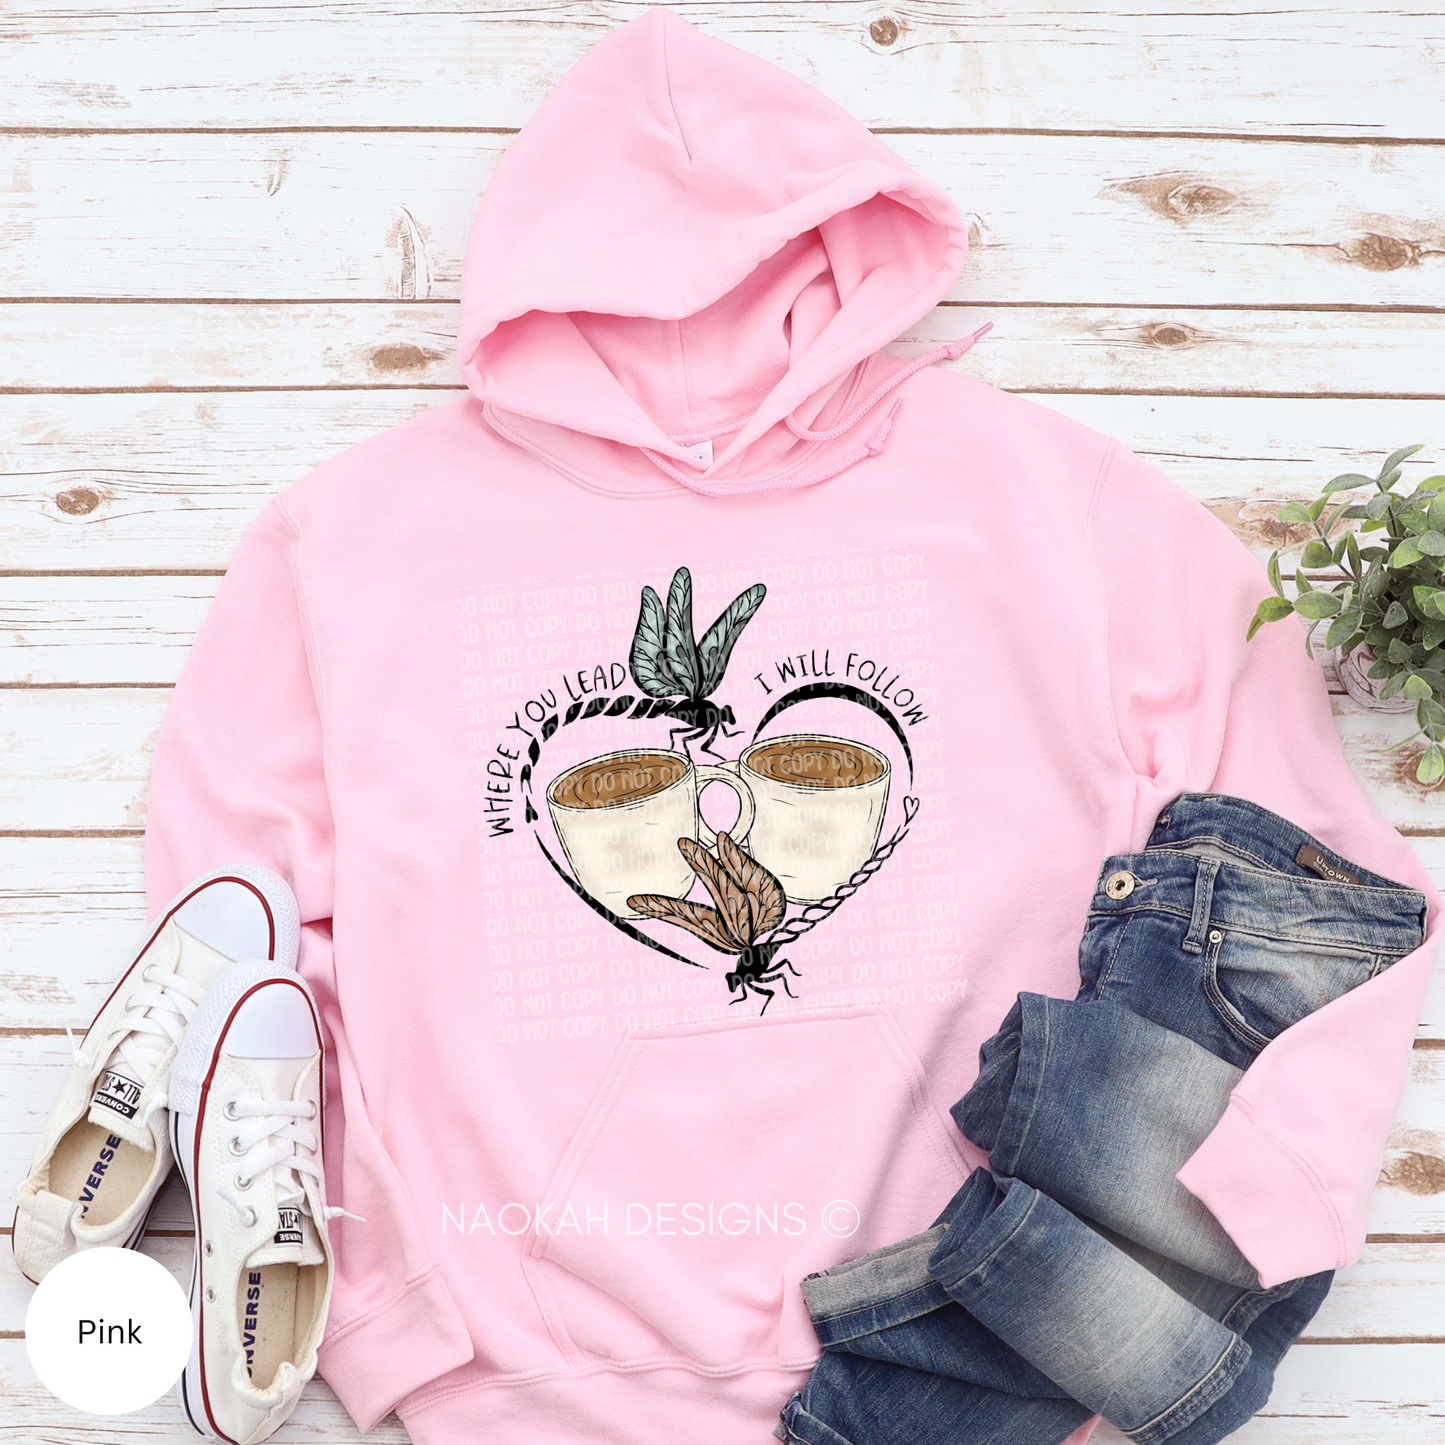 where you lead i will follow hoodie sweater, stars hollow sweater, coffee girl autumn inspired shirt, dragonfly inn shirt, stars hollow